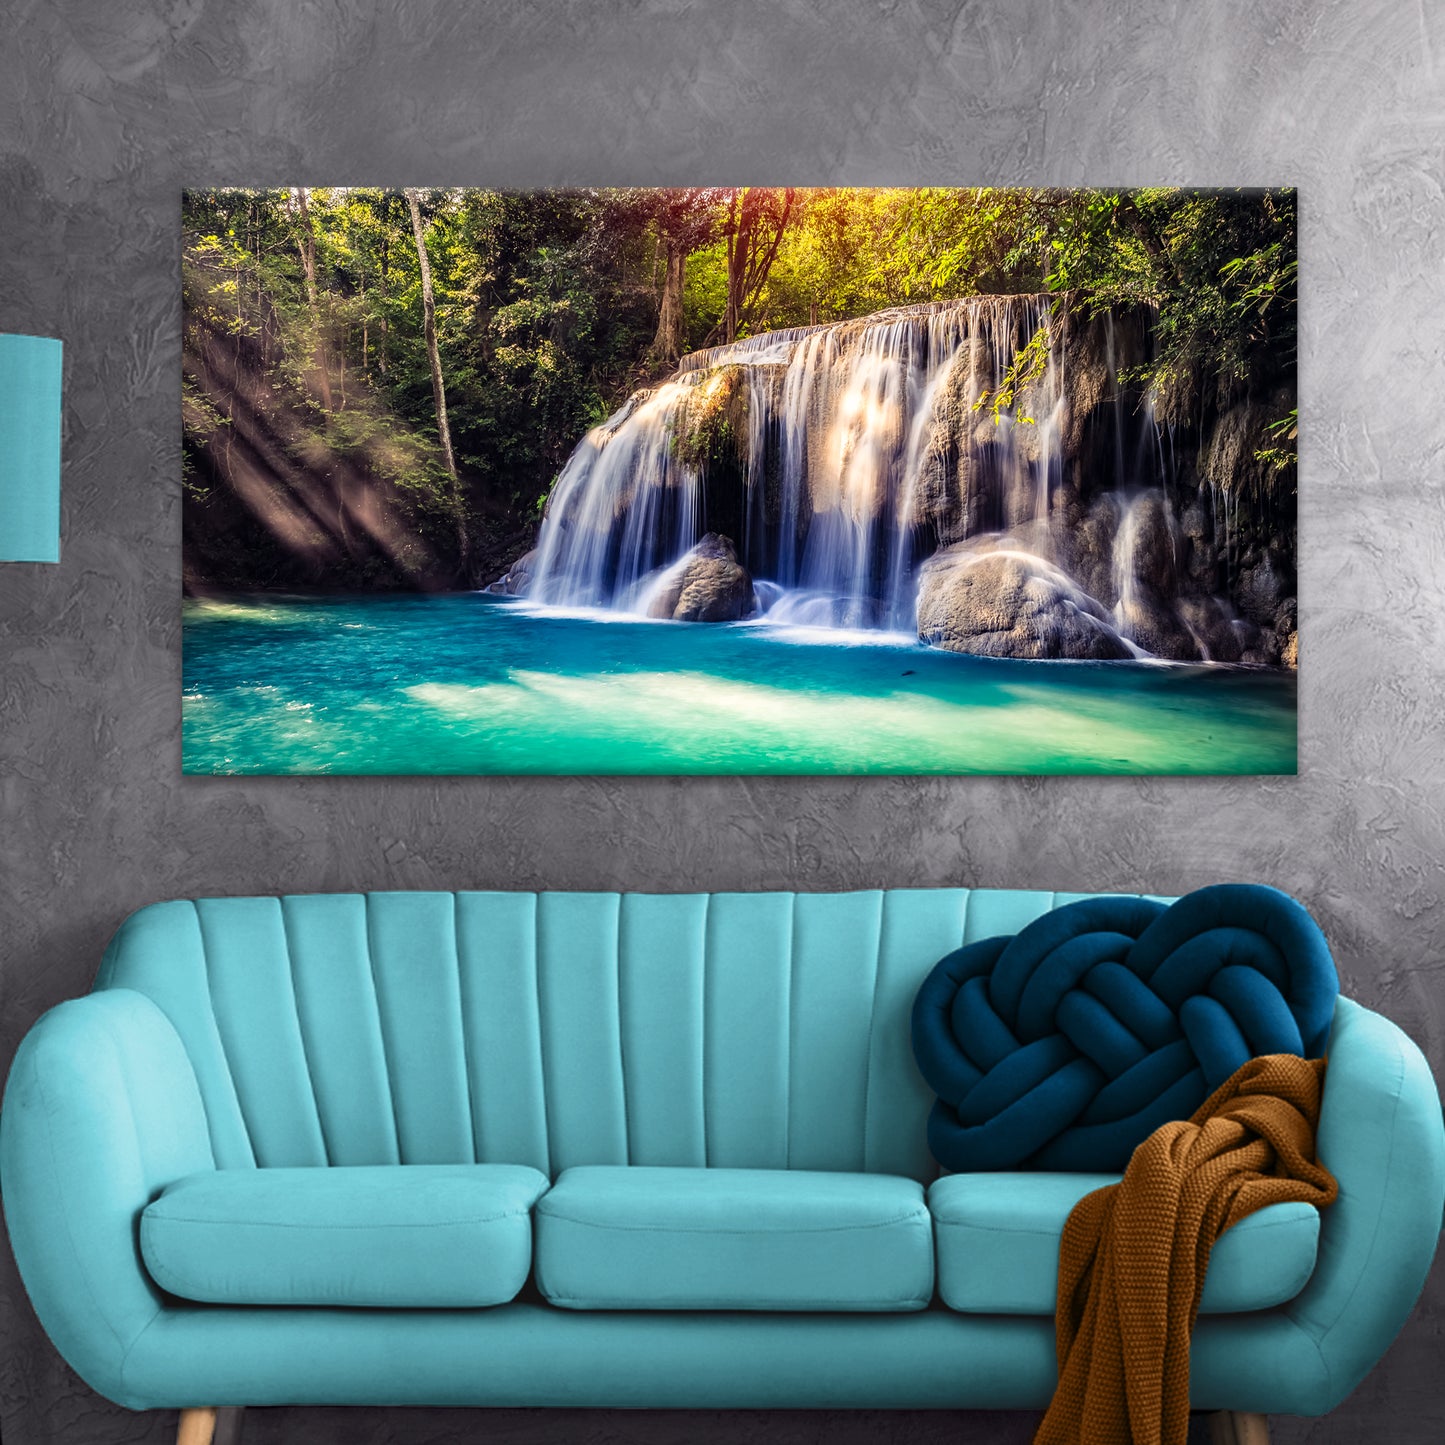 Rainforest Waterfall Canvas Wall Art Style 2 - Image by Tailored Canvases